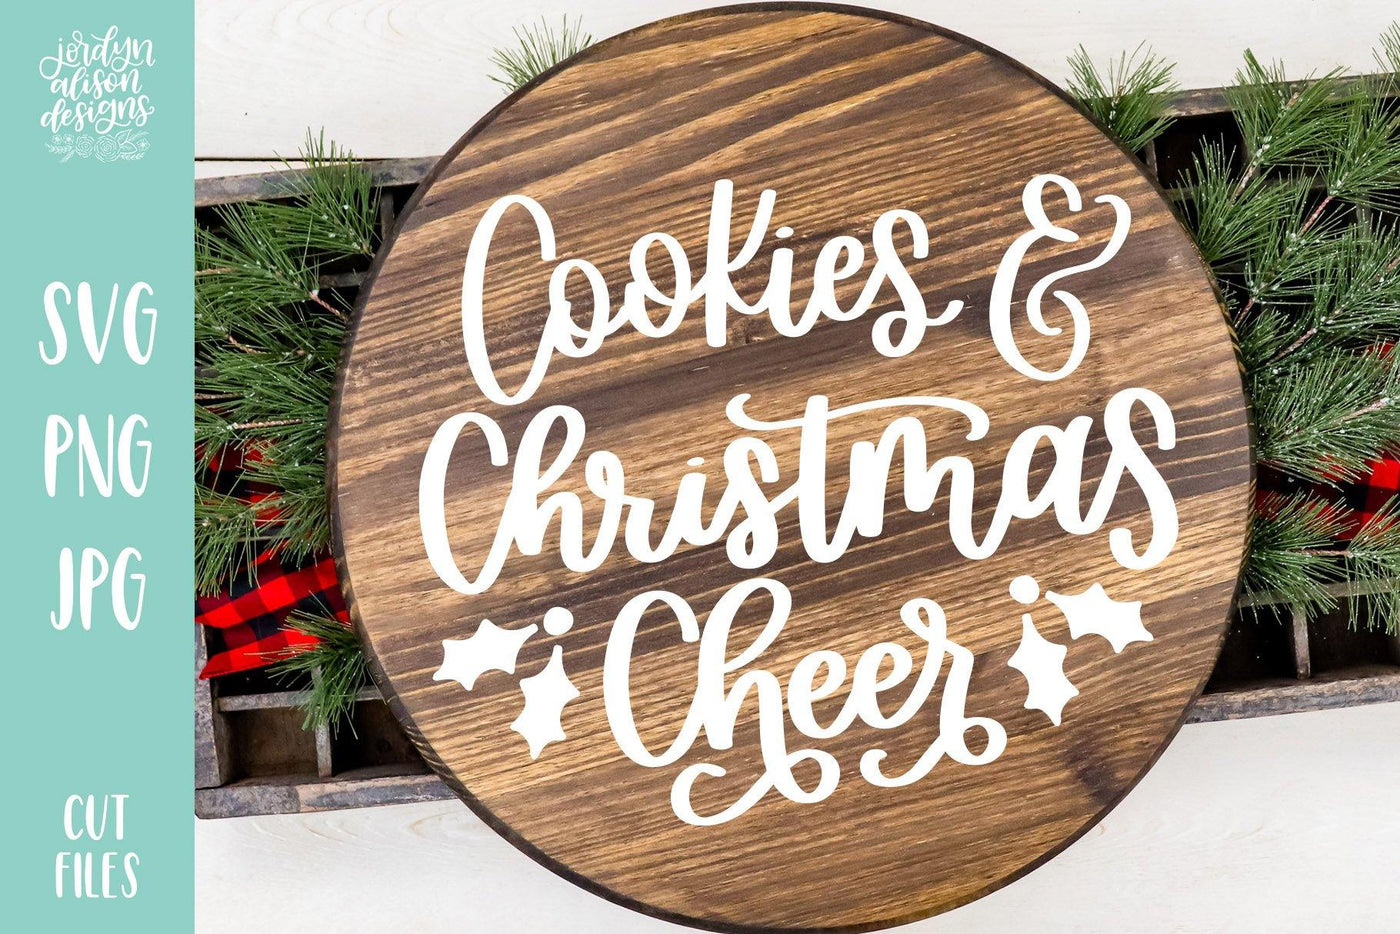 Round wood piece with handwritten text "Cookies & Christmas Cheer"